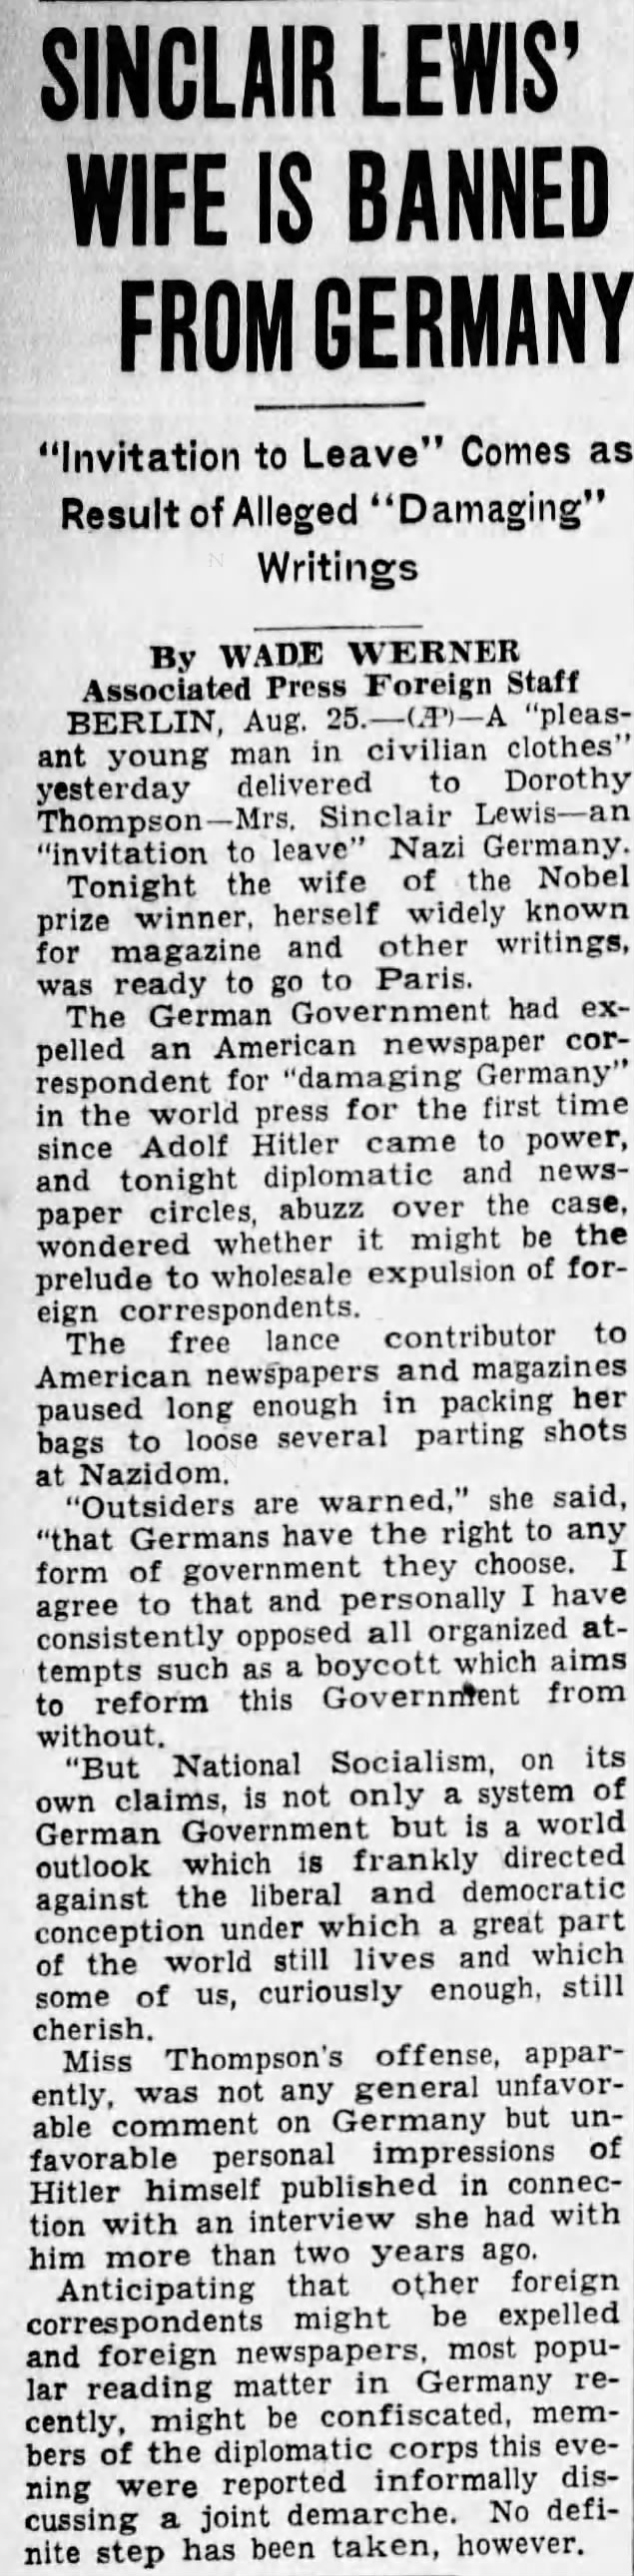 Sinclair Lewis' Wife is Banned From Germany - 26 Aug 1934 p2 Richmond Item